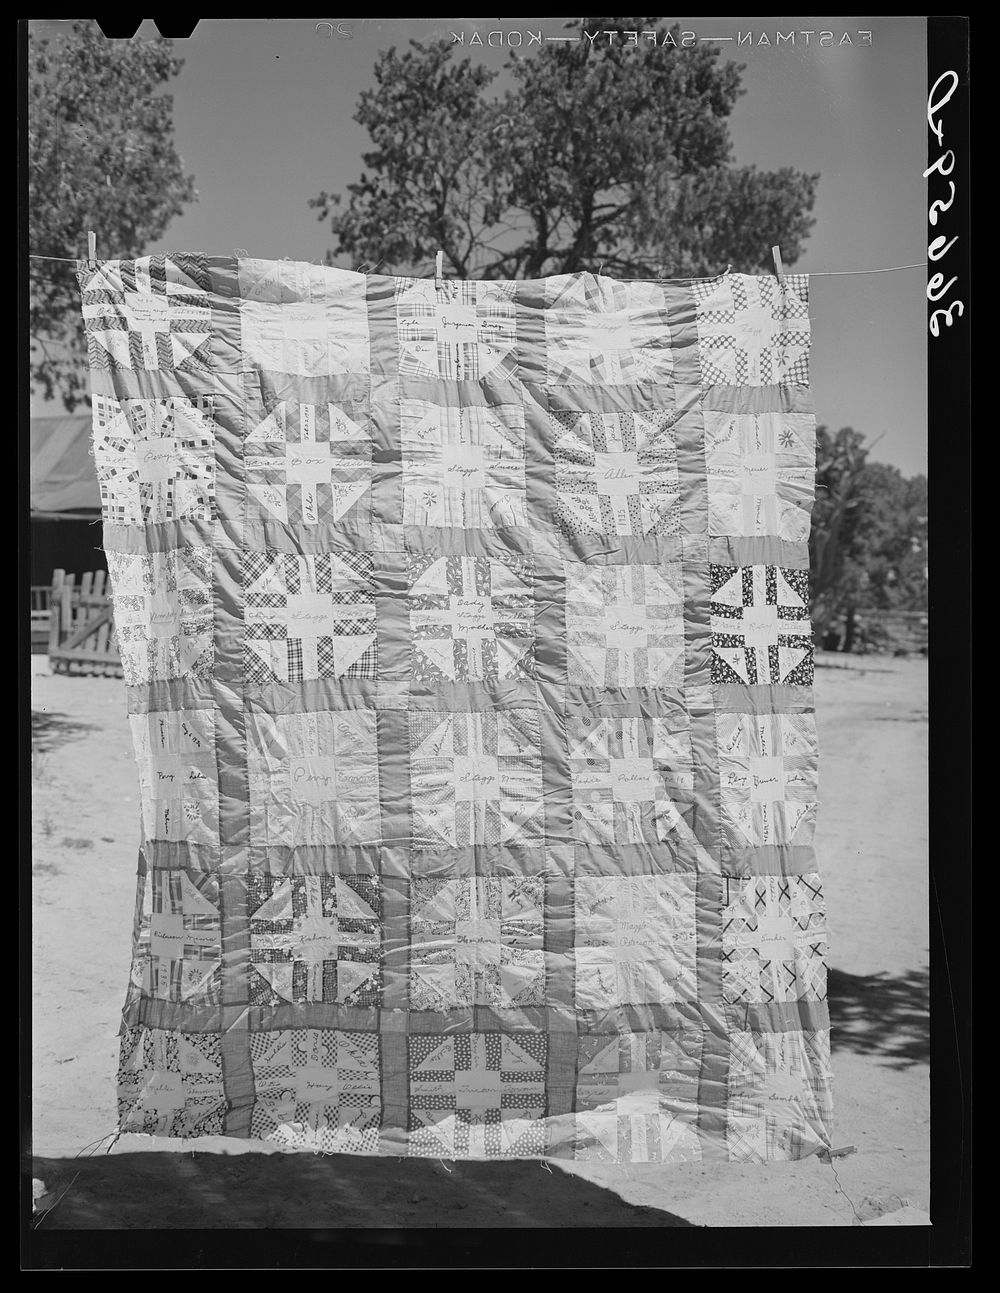 Friendship quilt. Pie Town, New Mexico by Russell Lee